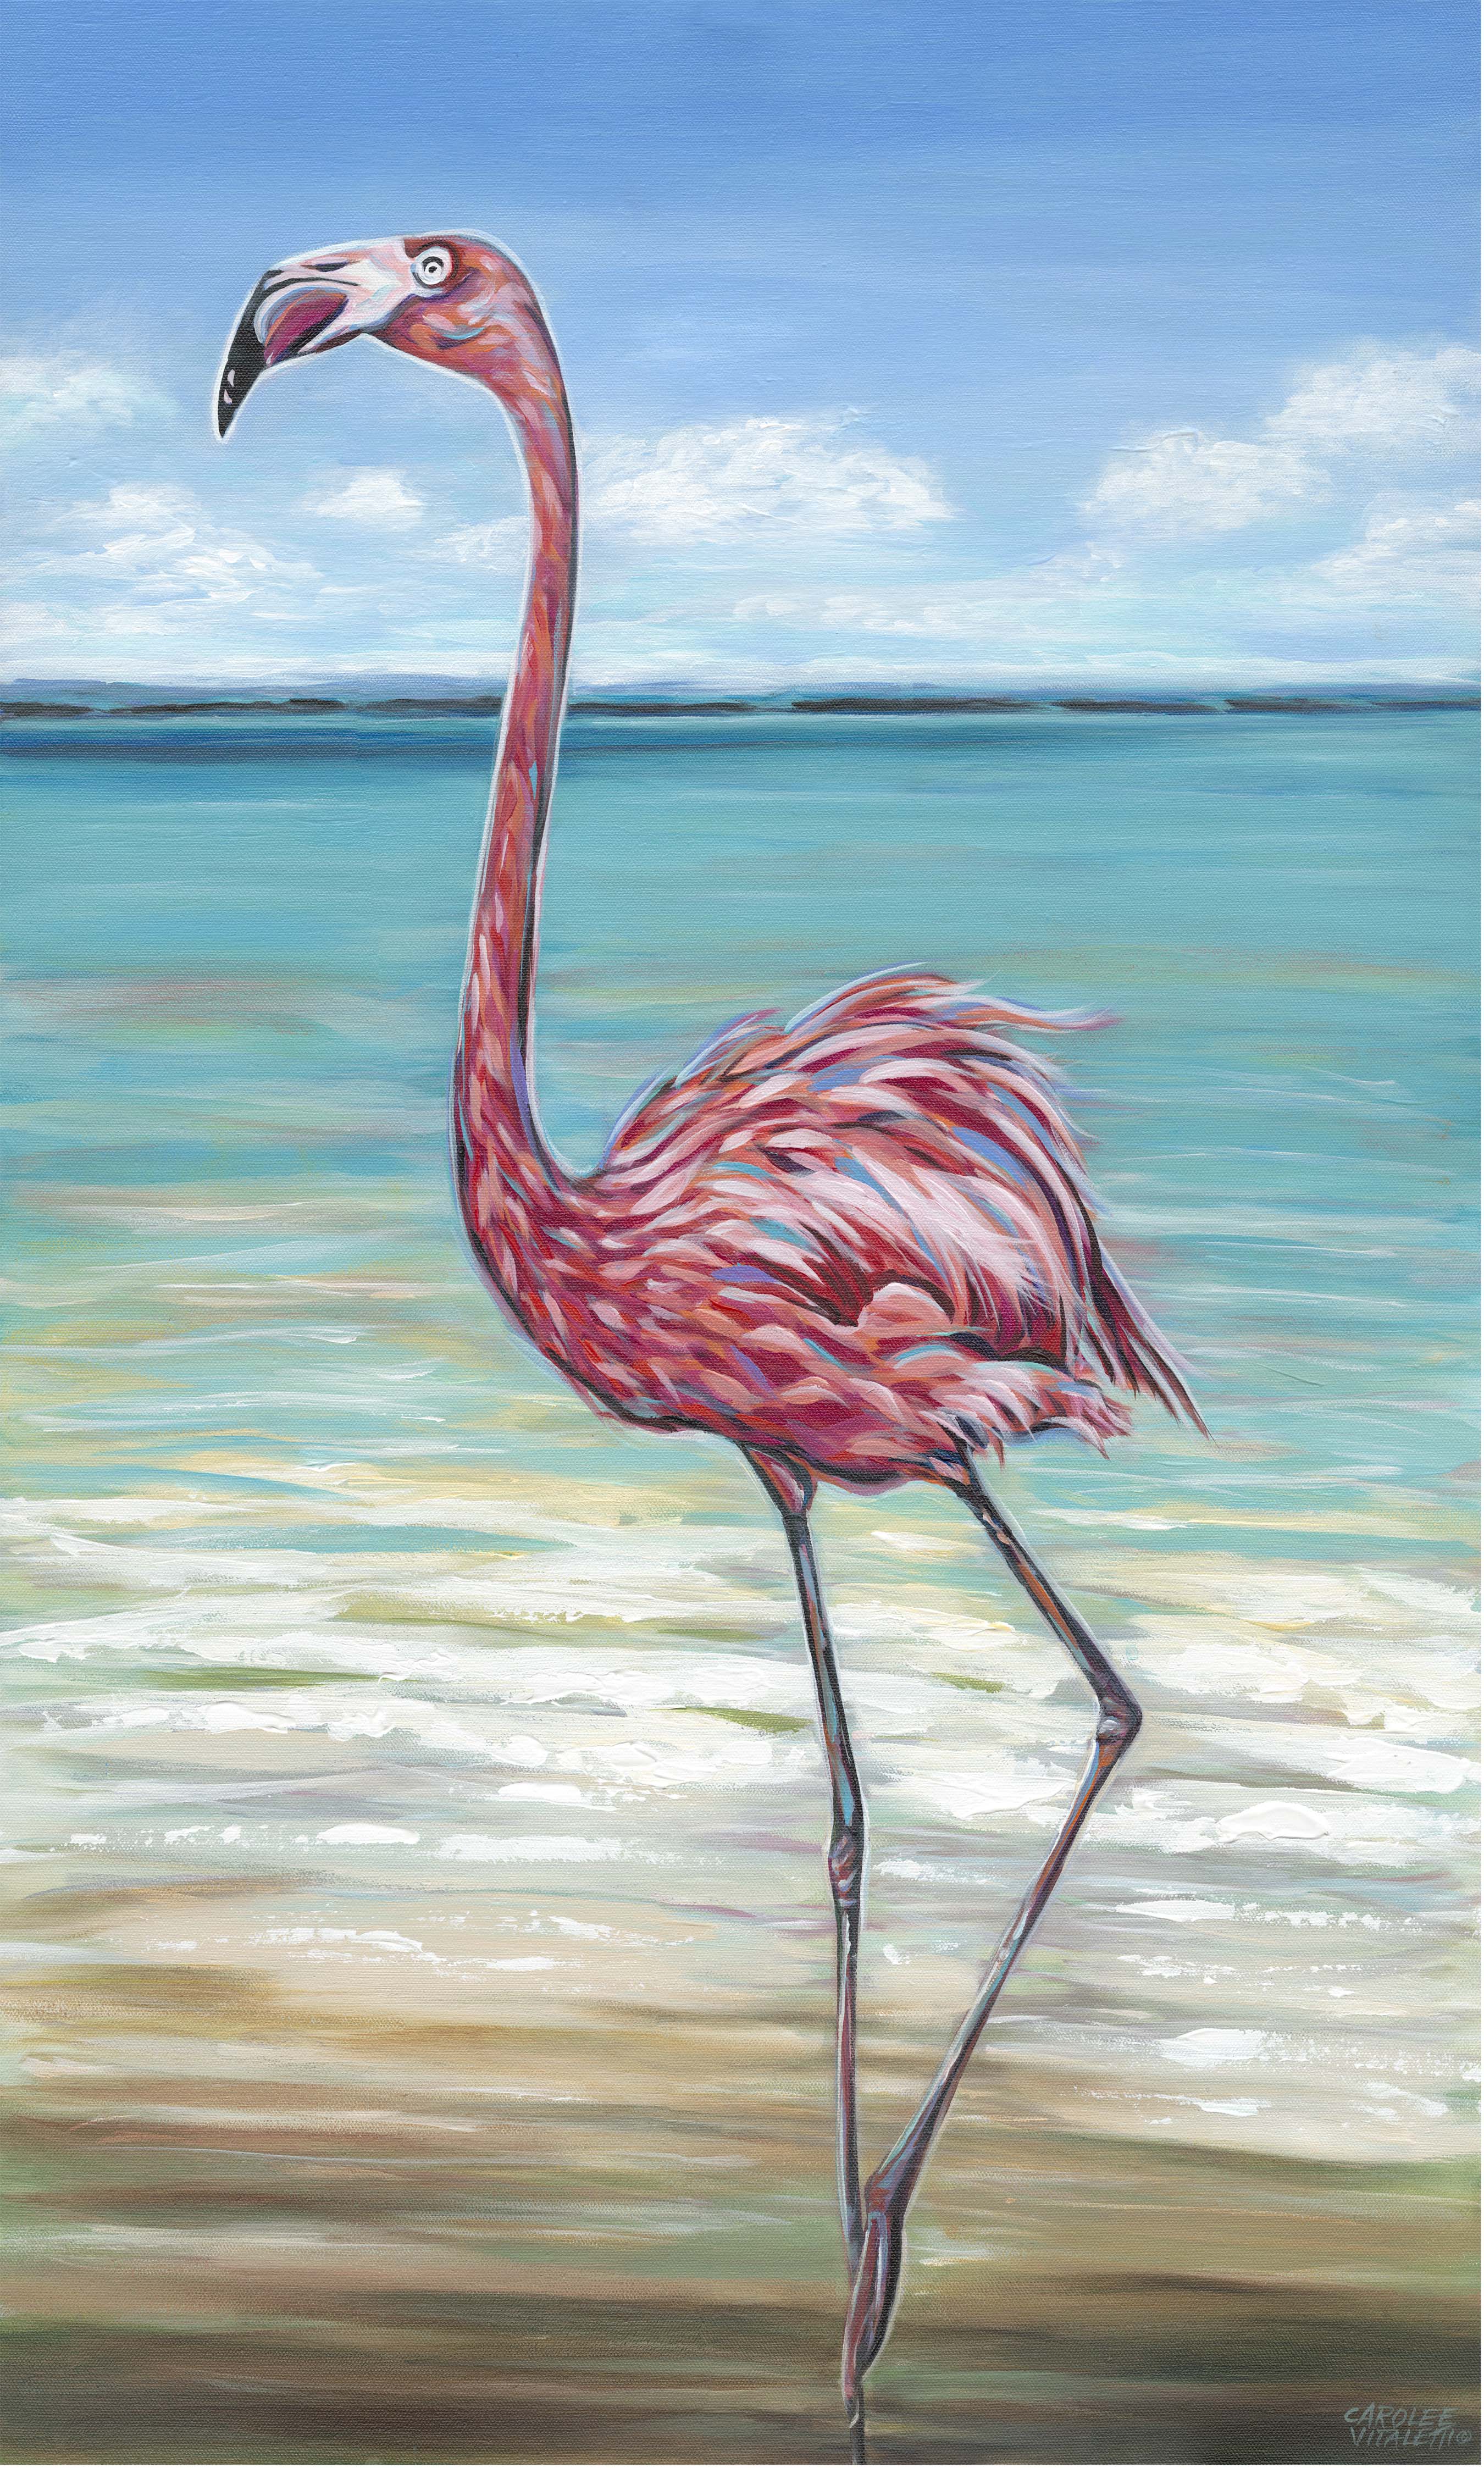 Marmont Hill 'Fishing Flamingos II' Painting Print on Wrapped Canvas, Gray